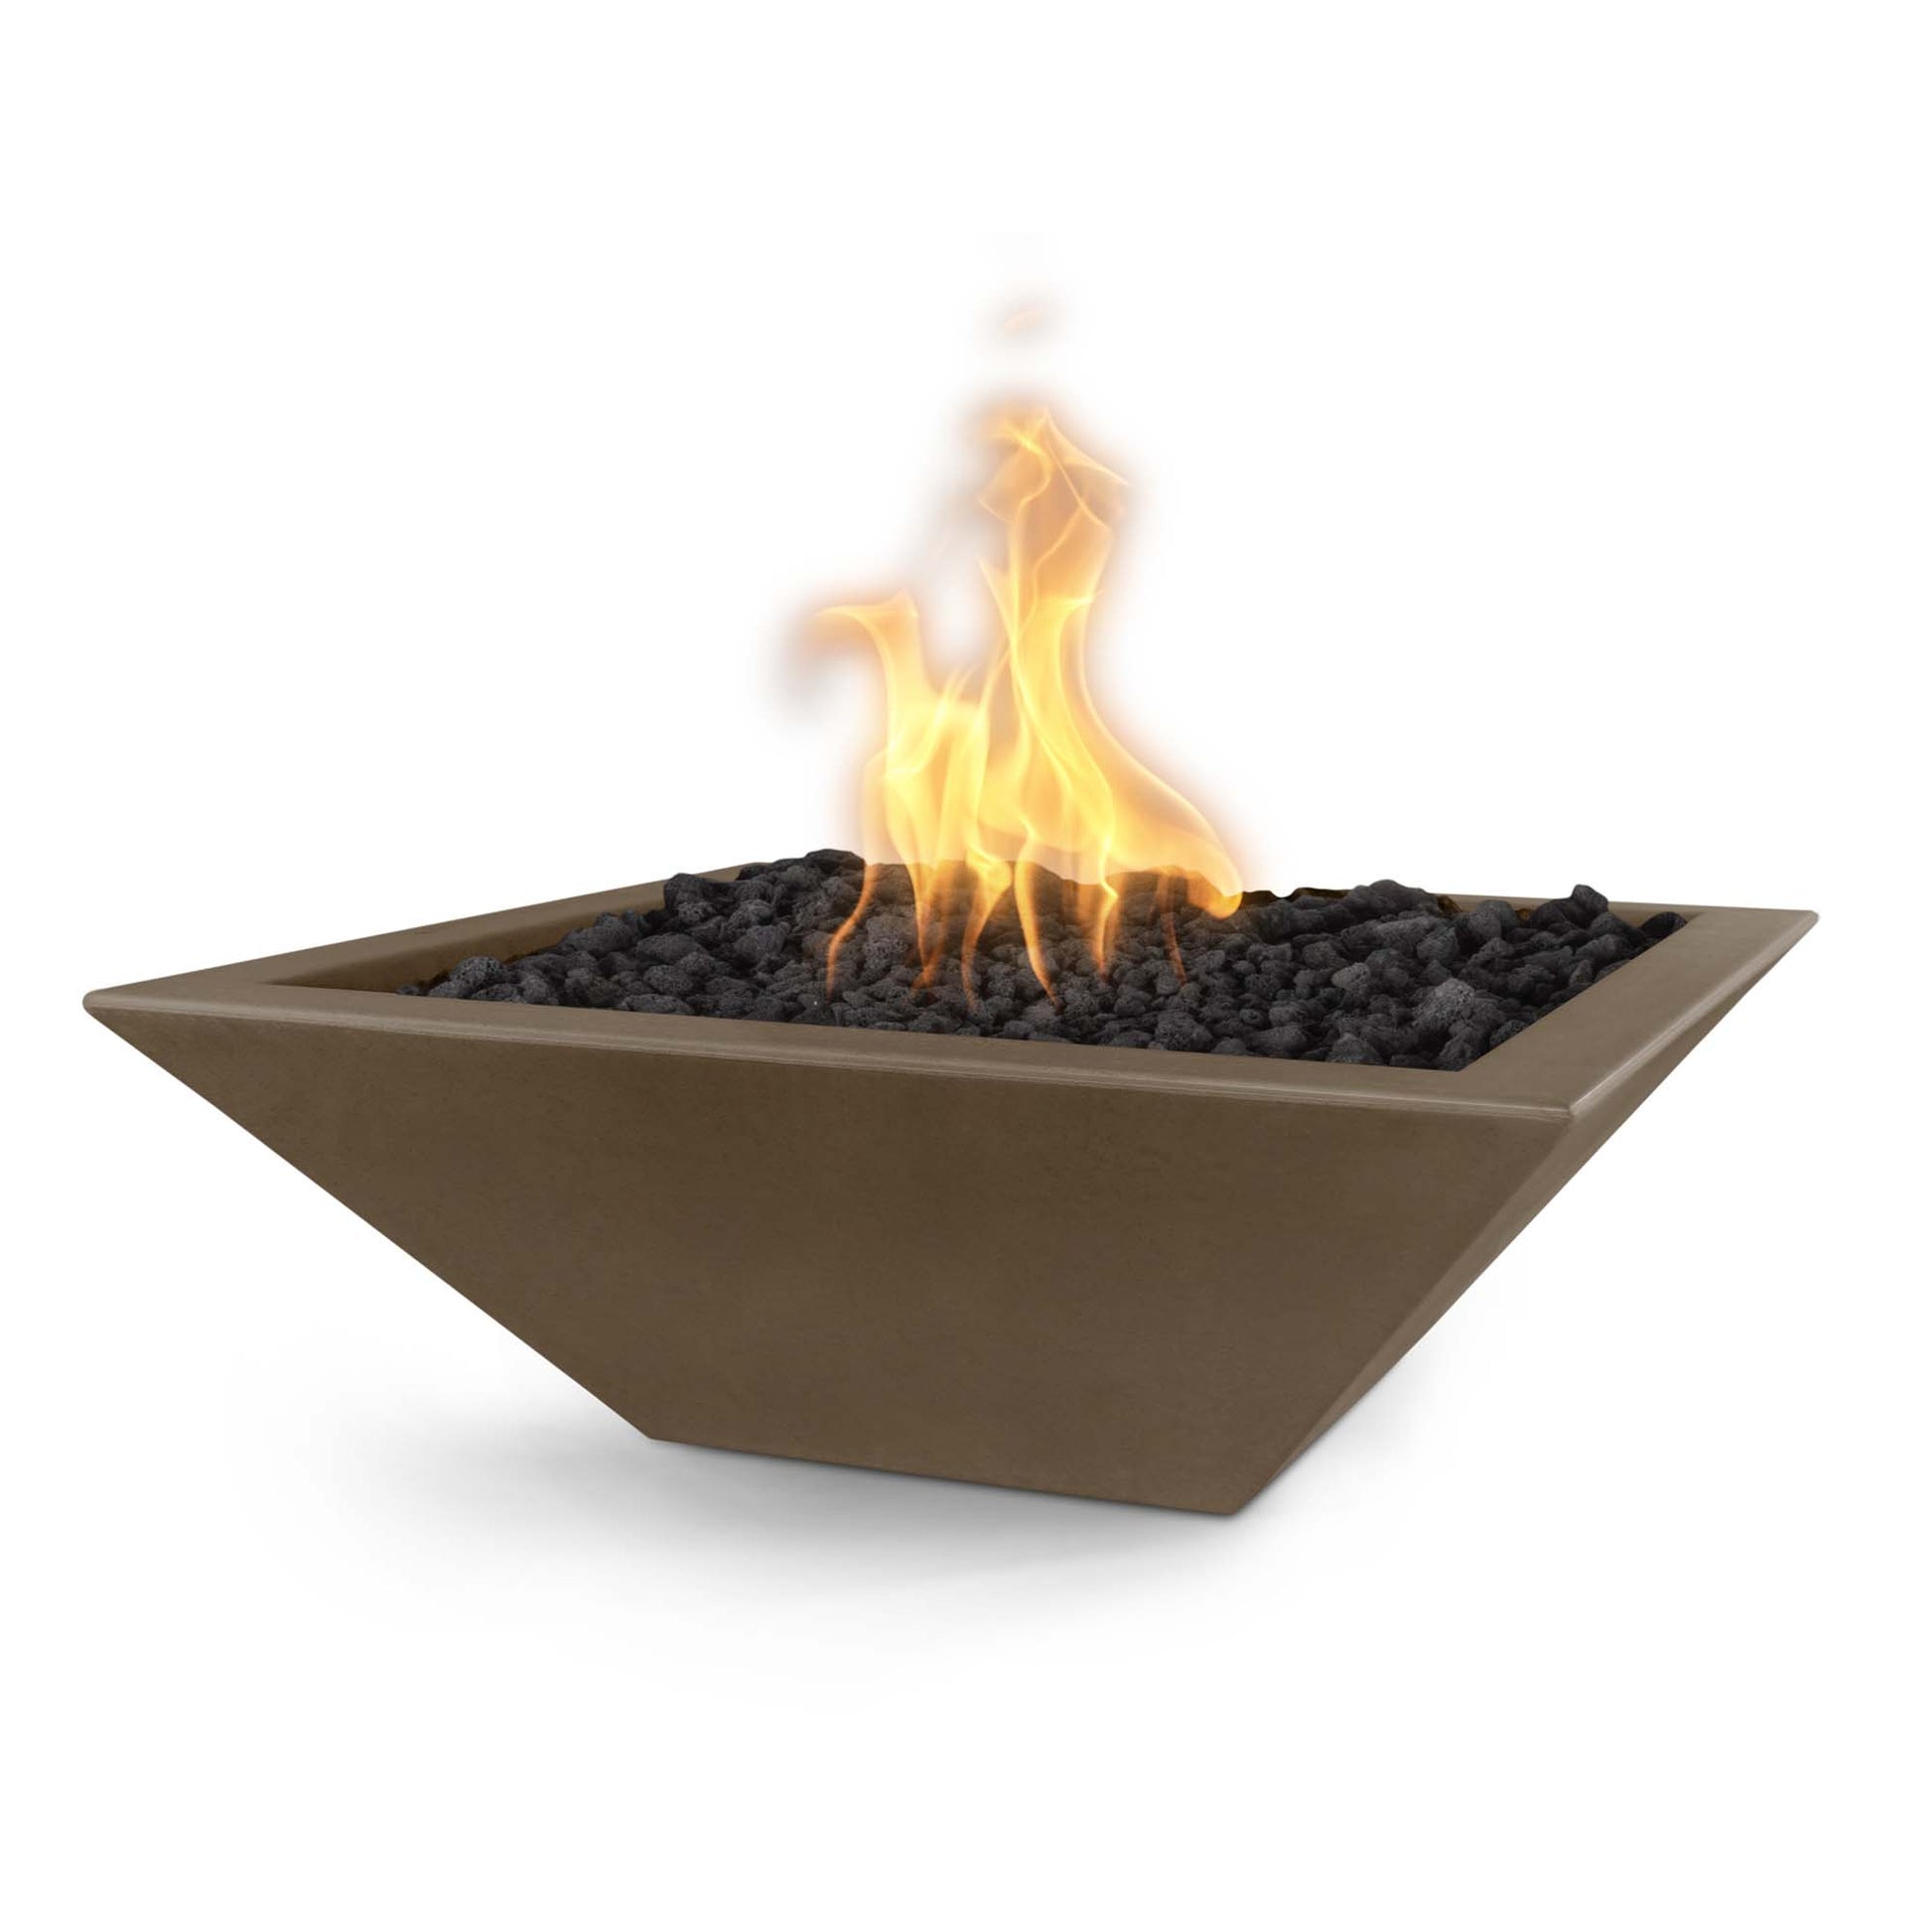 The Outdoor Plus Square Maya 36" Metallic Slate GFRC Concrete Liquid Propane Fire Bowl with Match Lit with Flame Sense Ignition